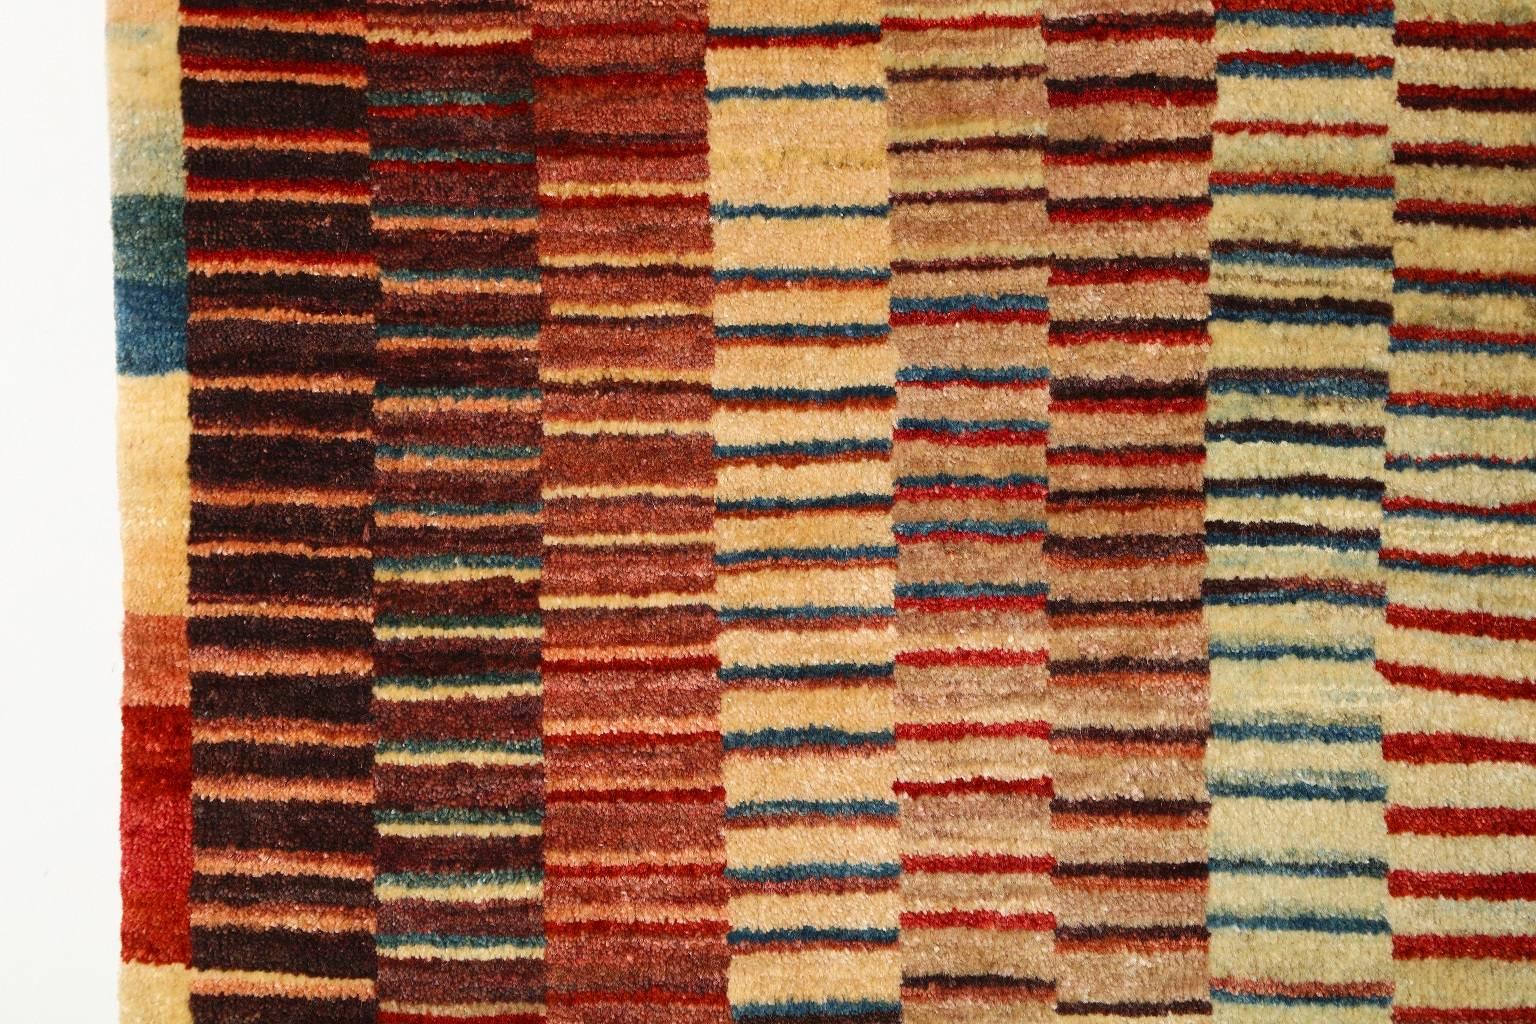 Contemporary Orley Shabahang Signature Carpet in Handspun Wool and Vegetable Dyes